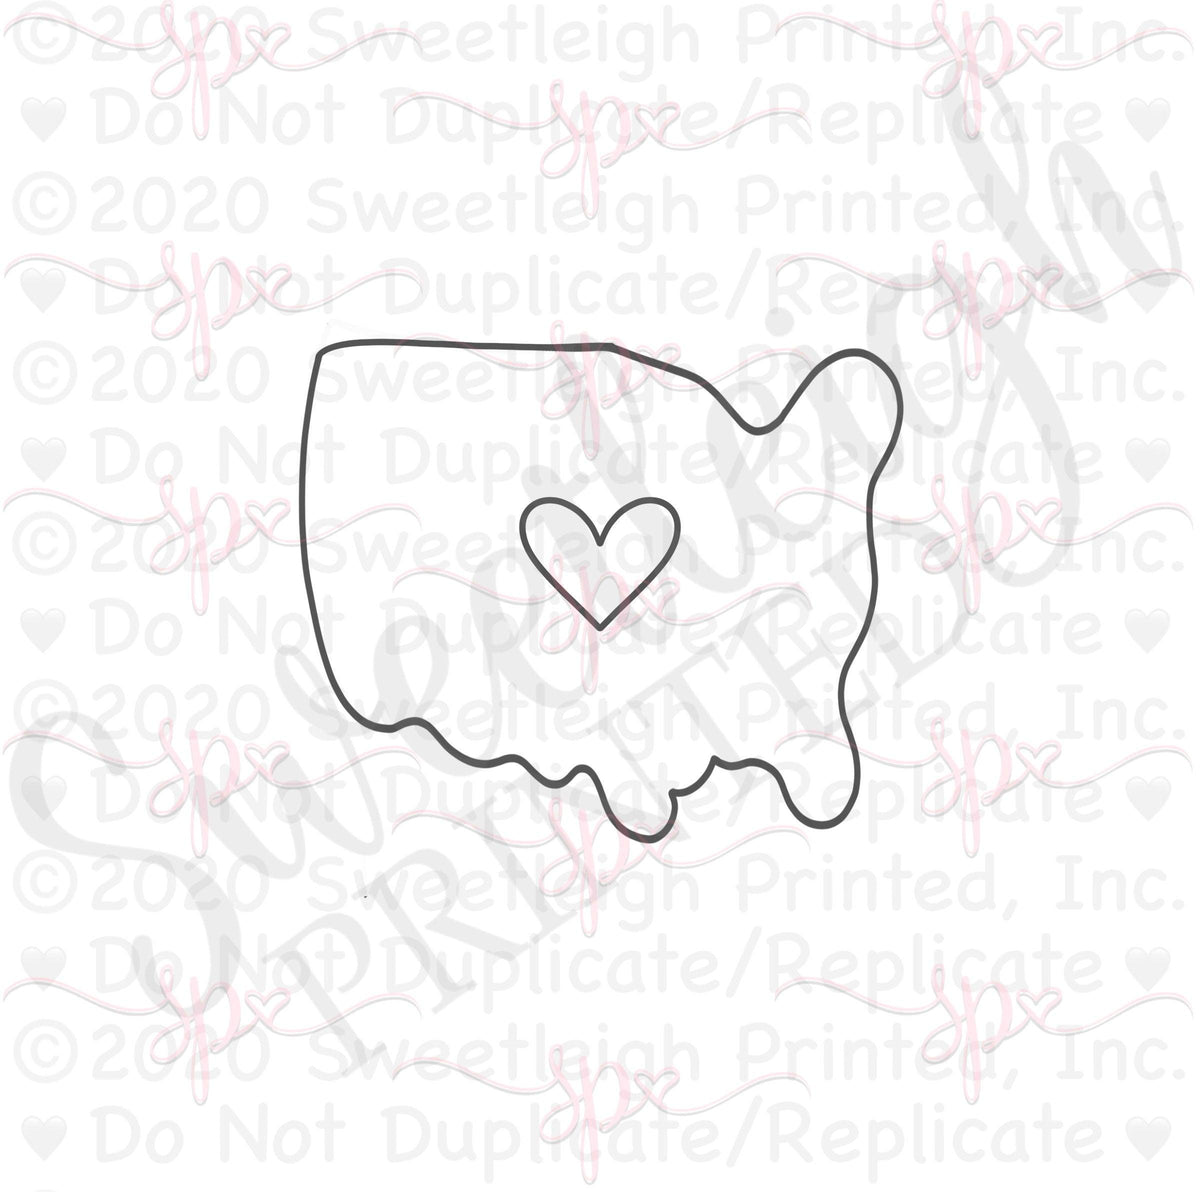 Chubby United States with Heart Cutout Cookie Cutter - Sweetleigh 